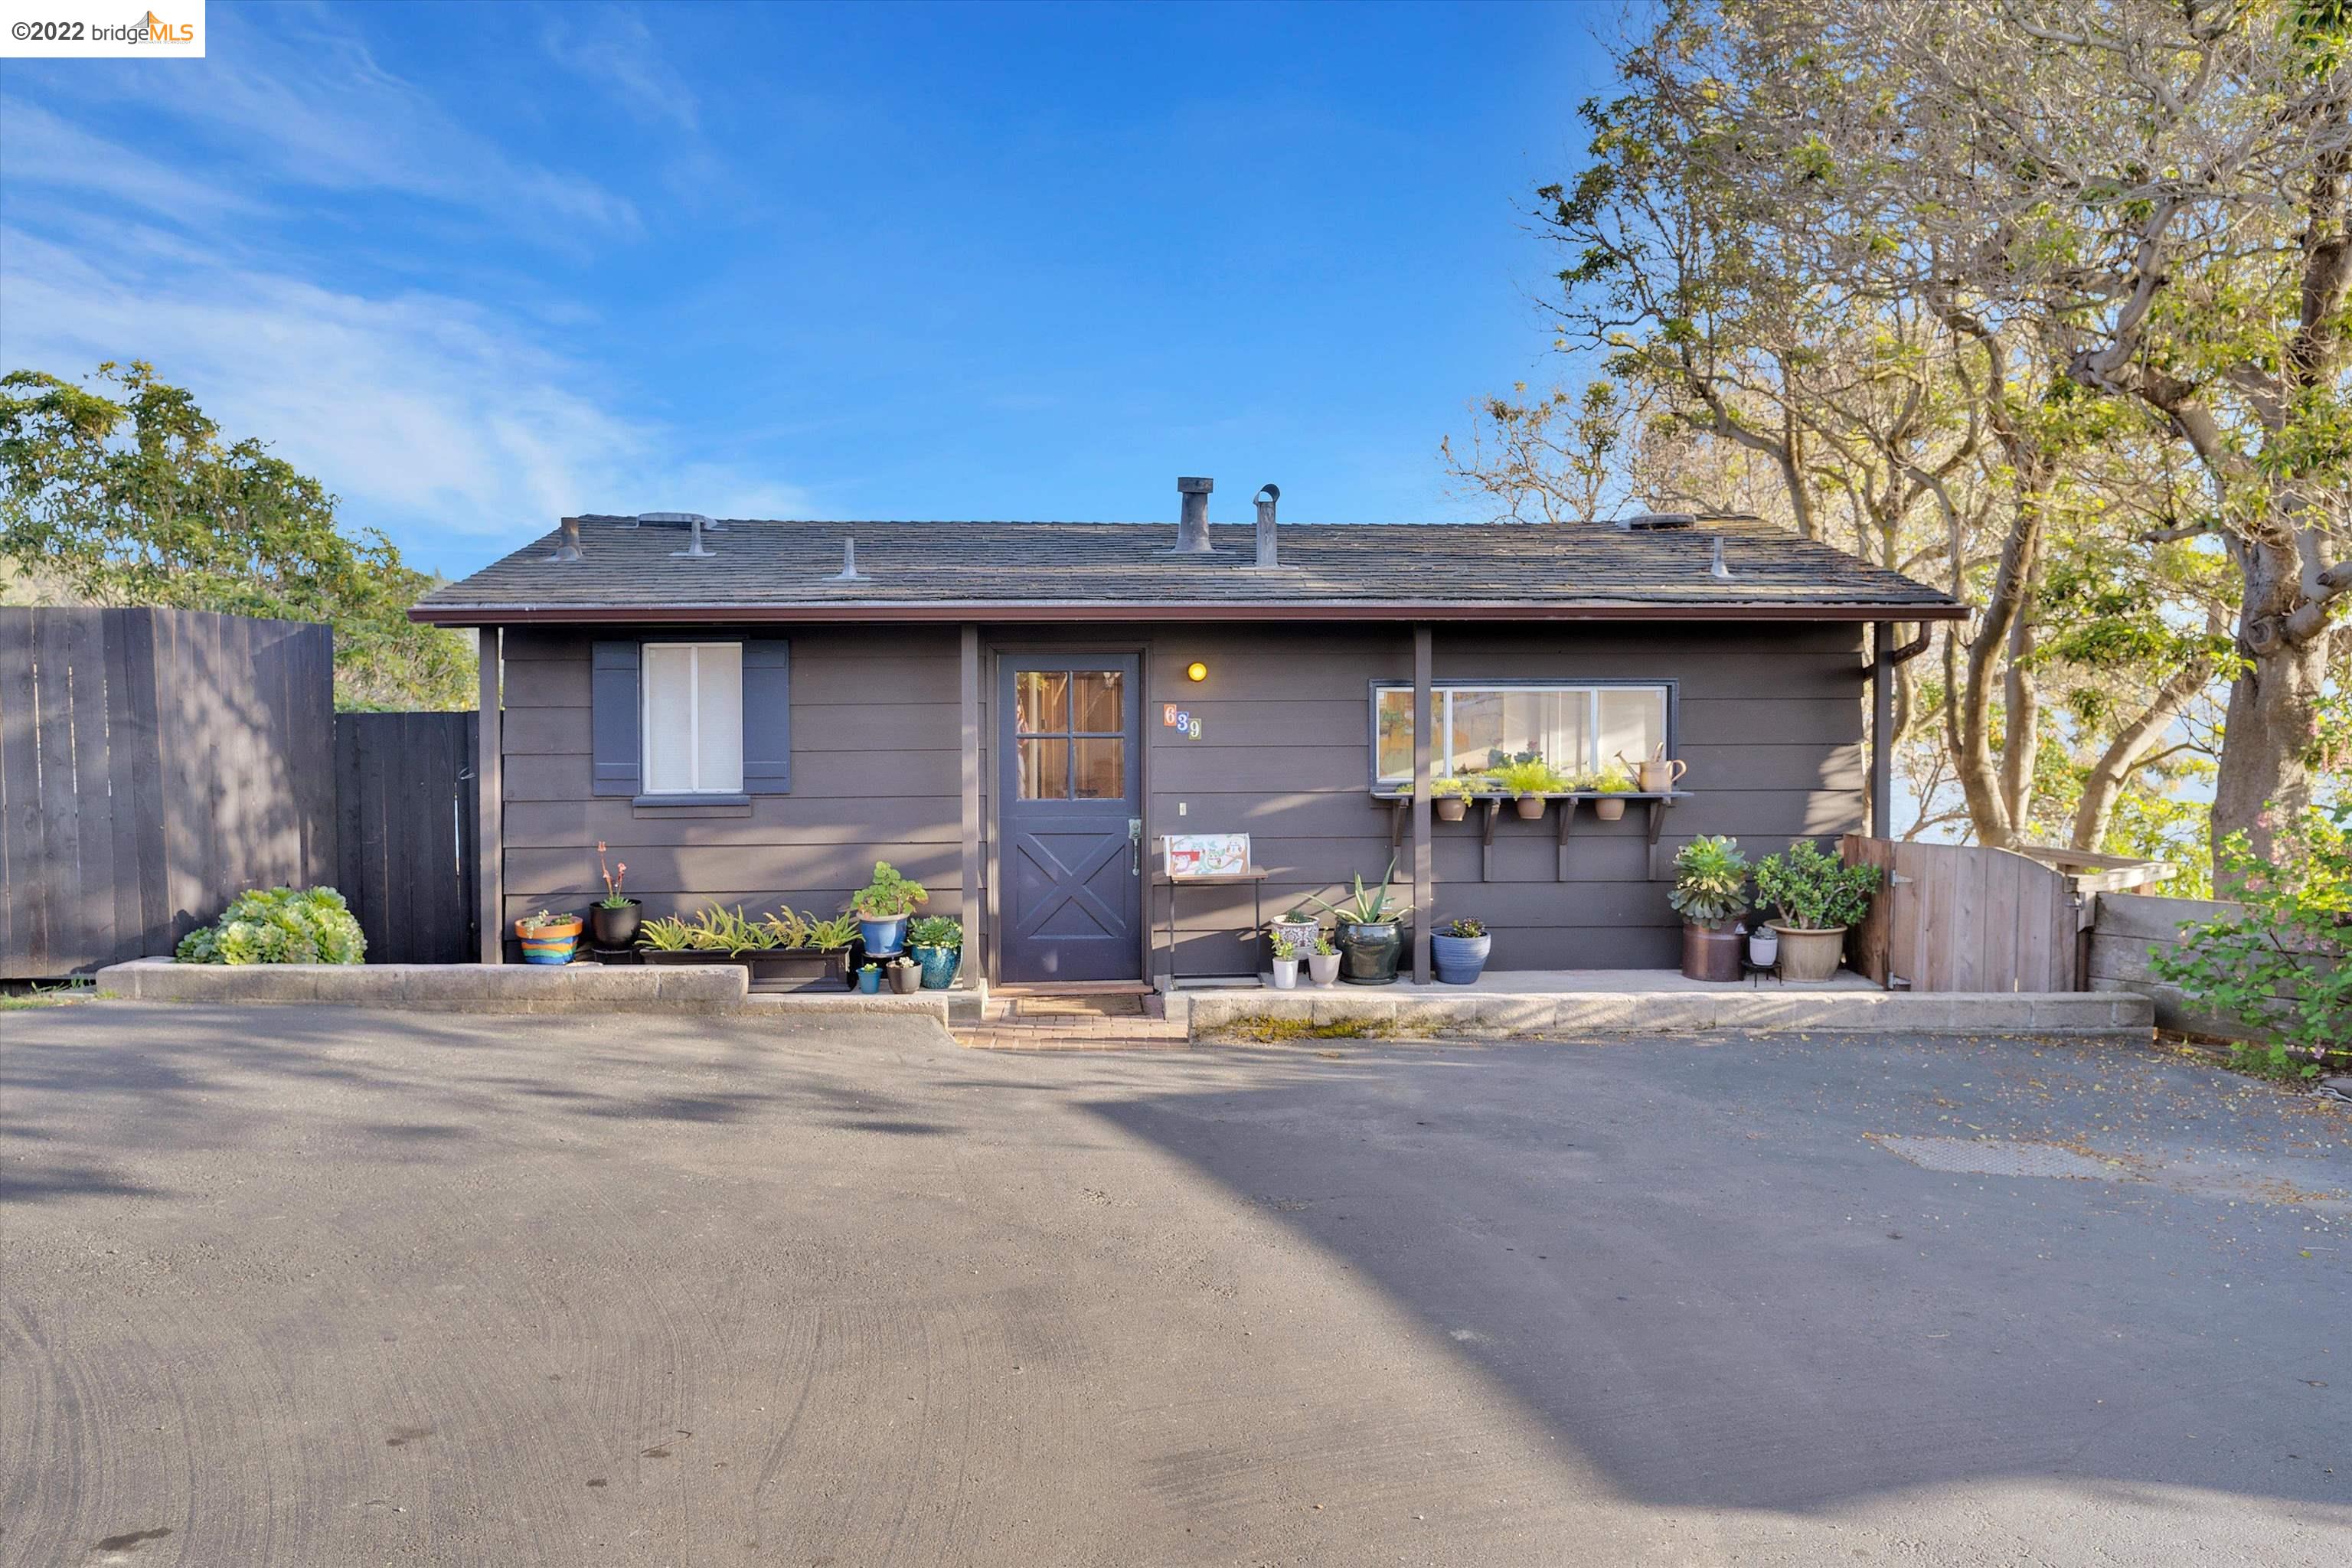 Photo of 639 Cypress Point Rd in Richmond, CA